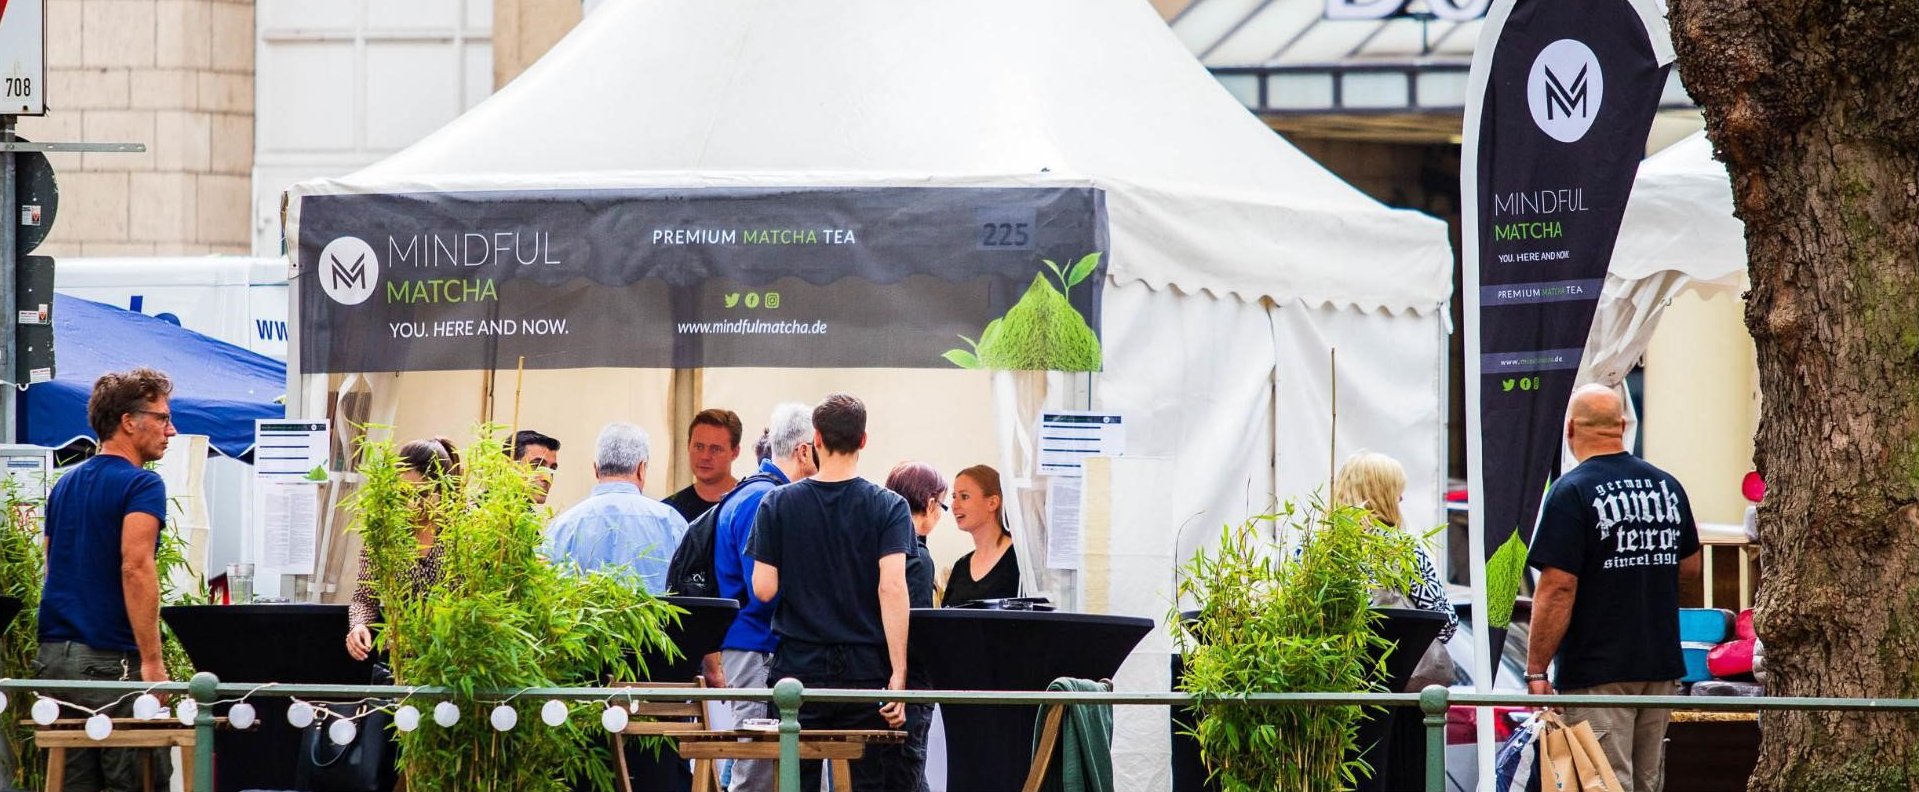 Gourmet Festival Stand - © Mindful Matcha